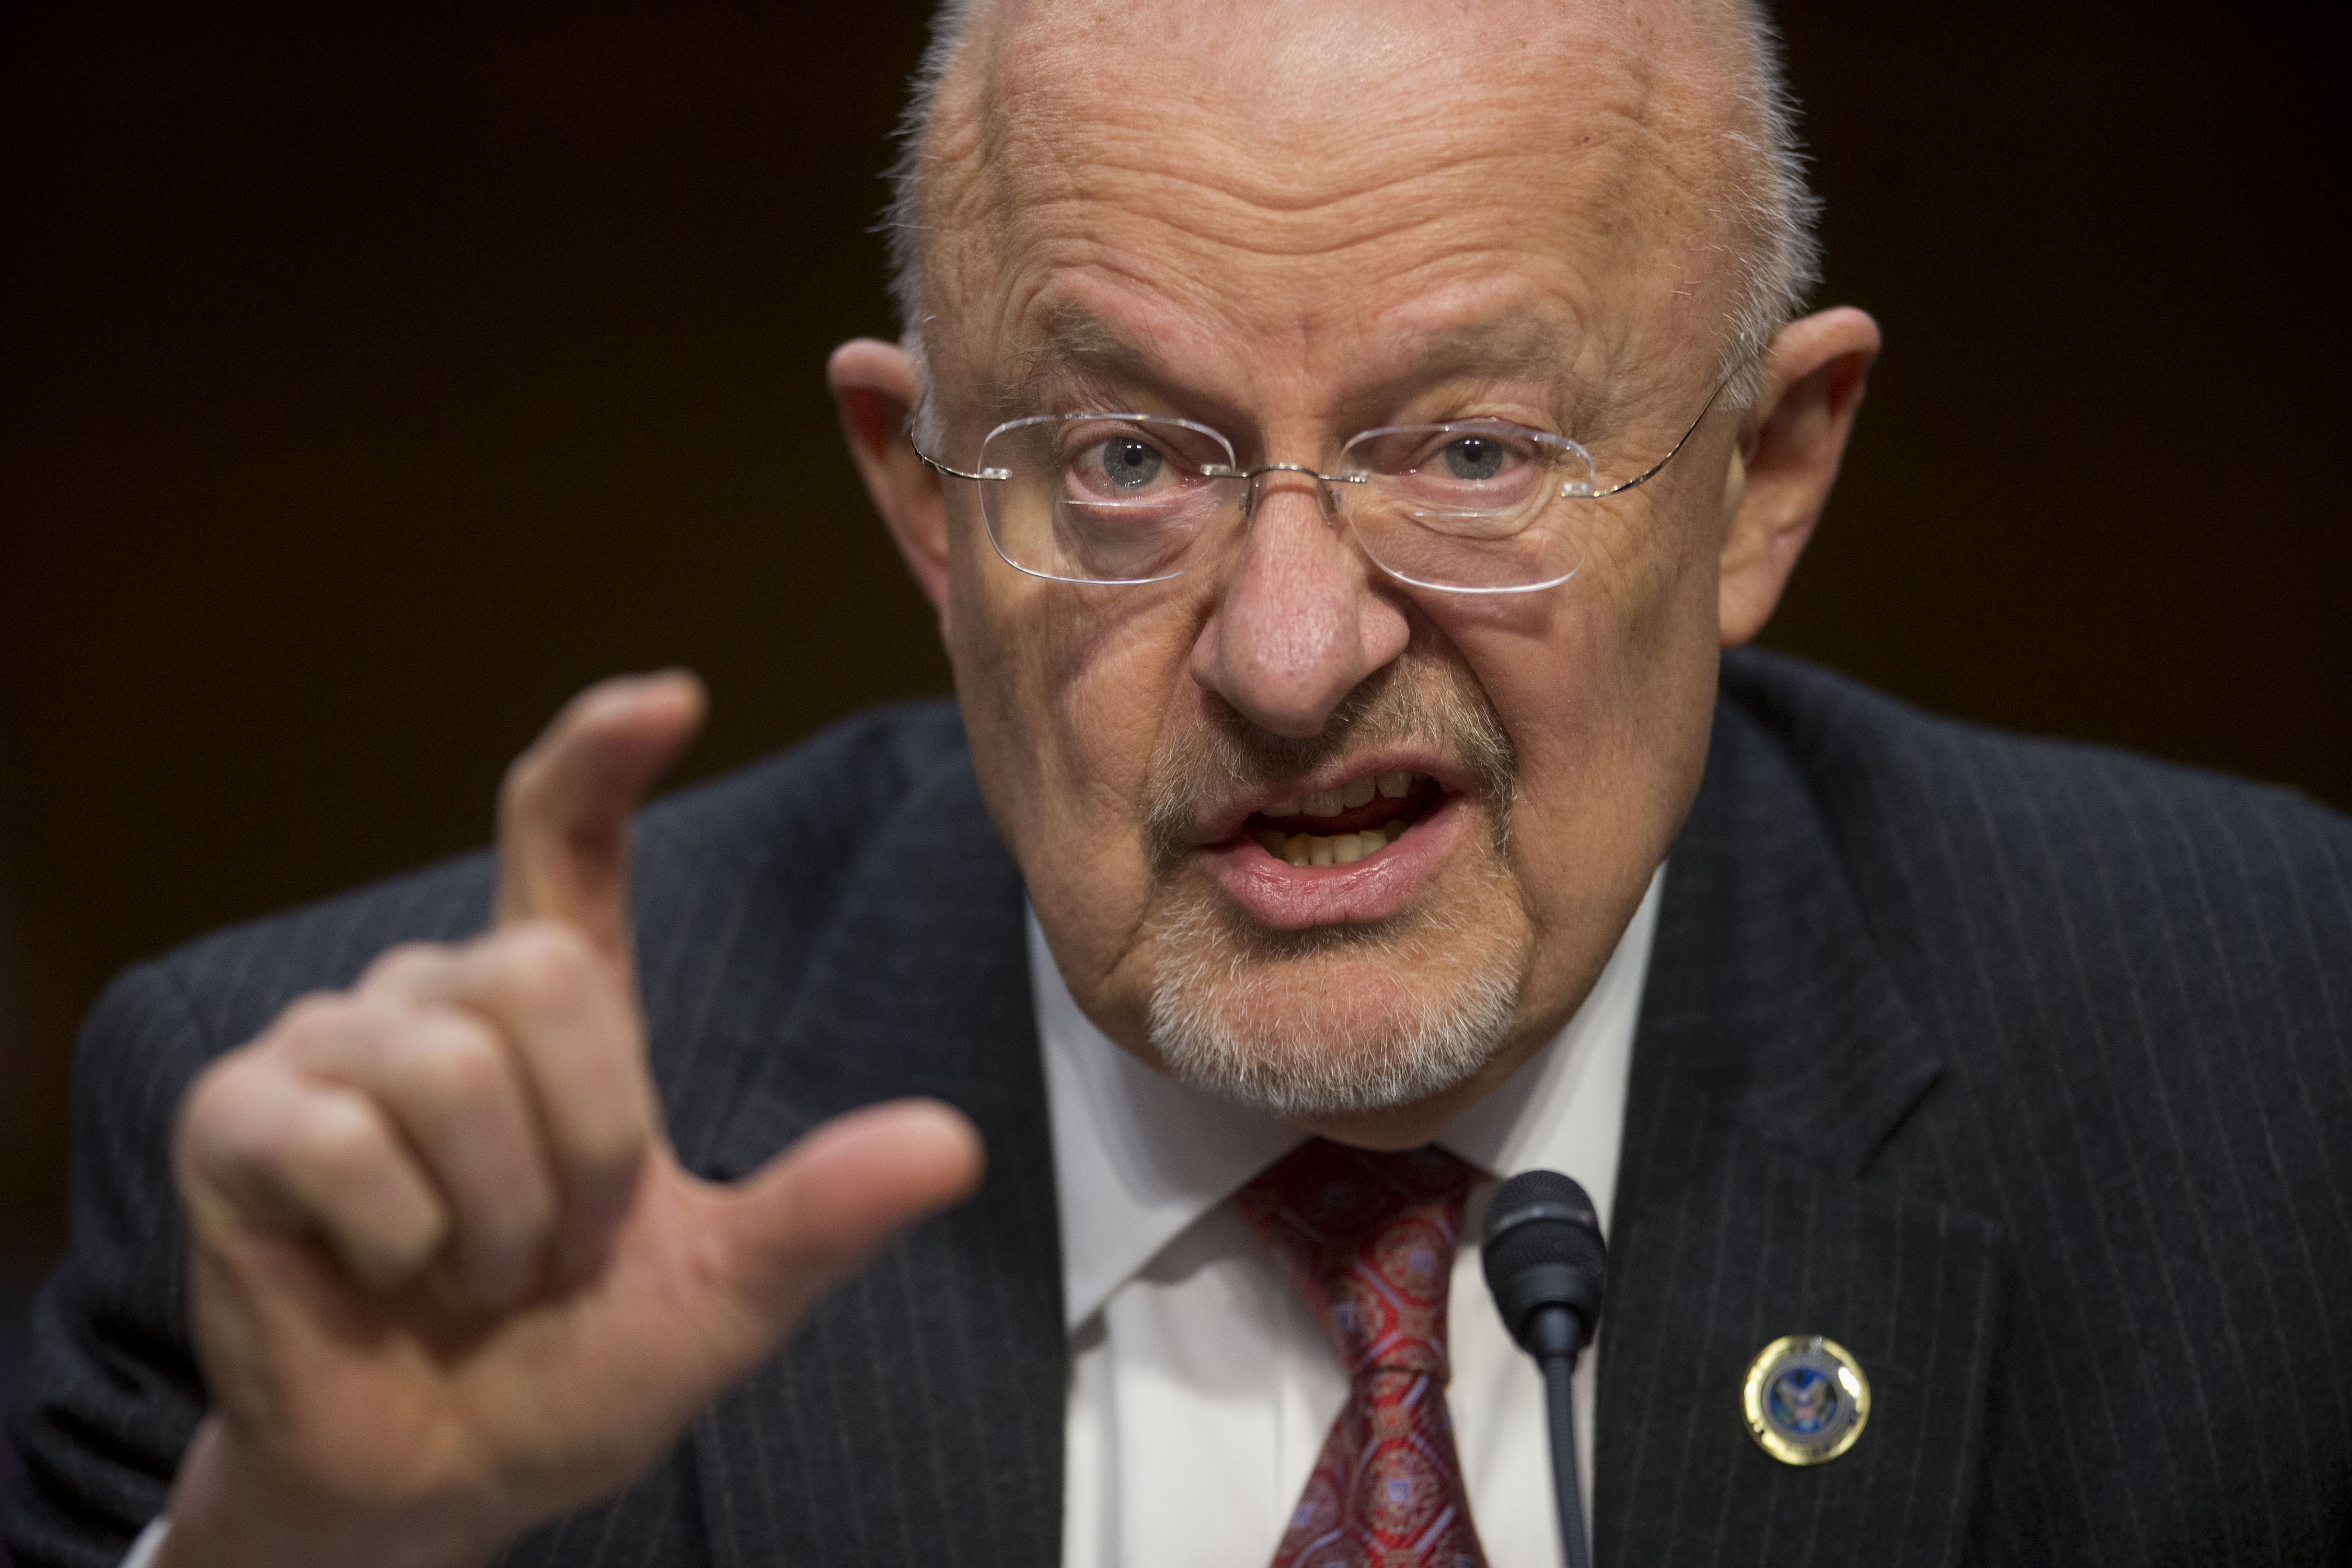 Director of National Intelligence James Clapper testifies on Capitol Hill in Washington, Wednesday, Jan. 29, 2014, before the Senate Intelligence Committee hearing on current and projected national security threats against the US. (Pablo Martinez Monsivais—AP)